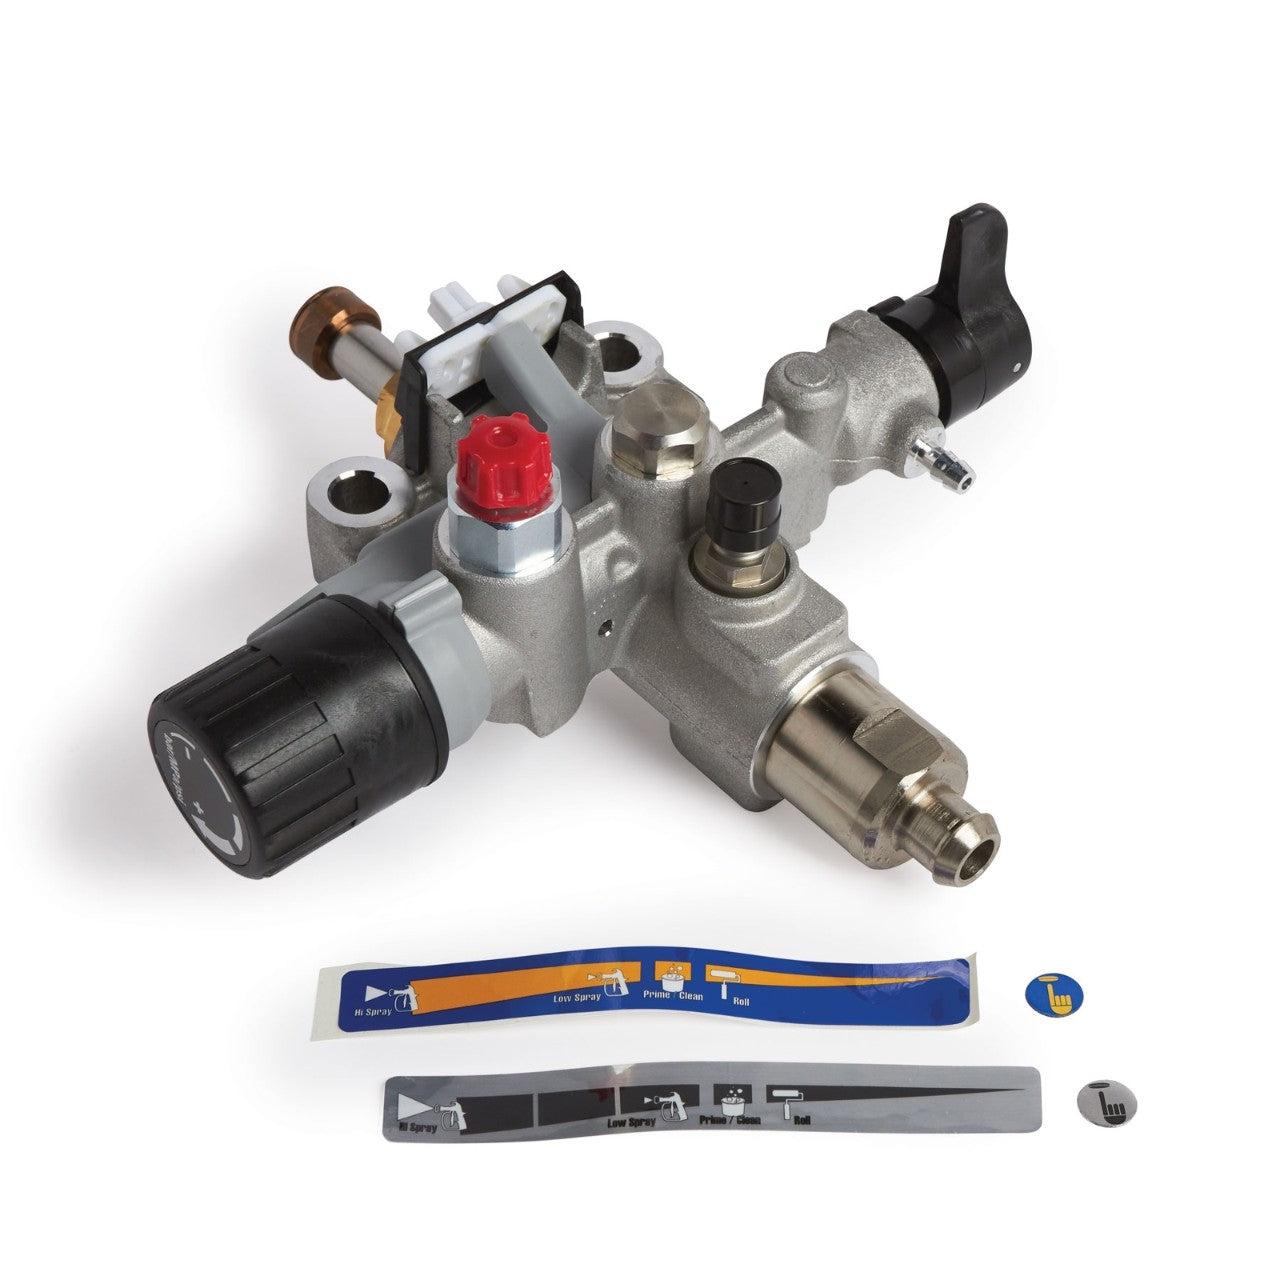 Magnum ProX Pump Assembly Replacement Kit